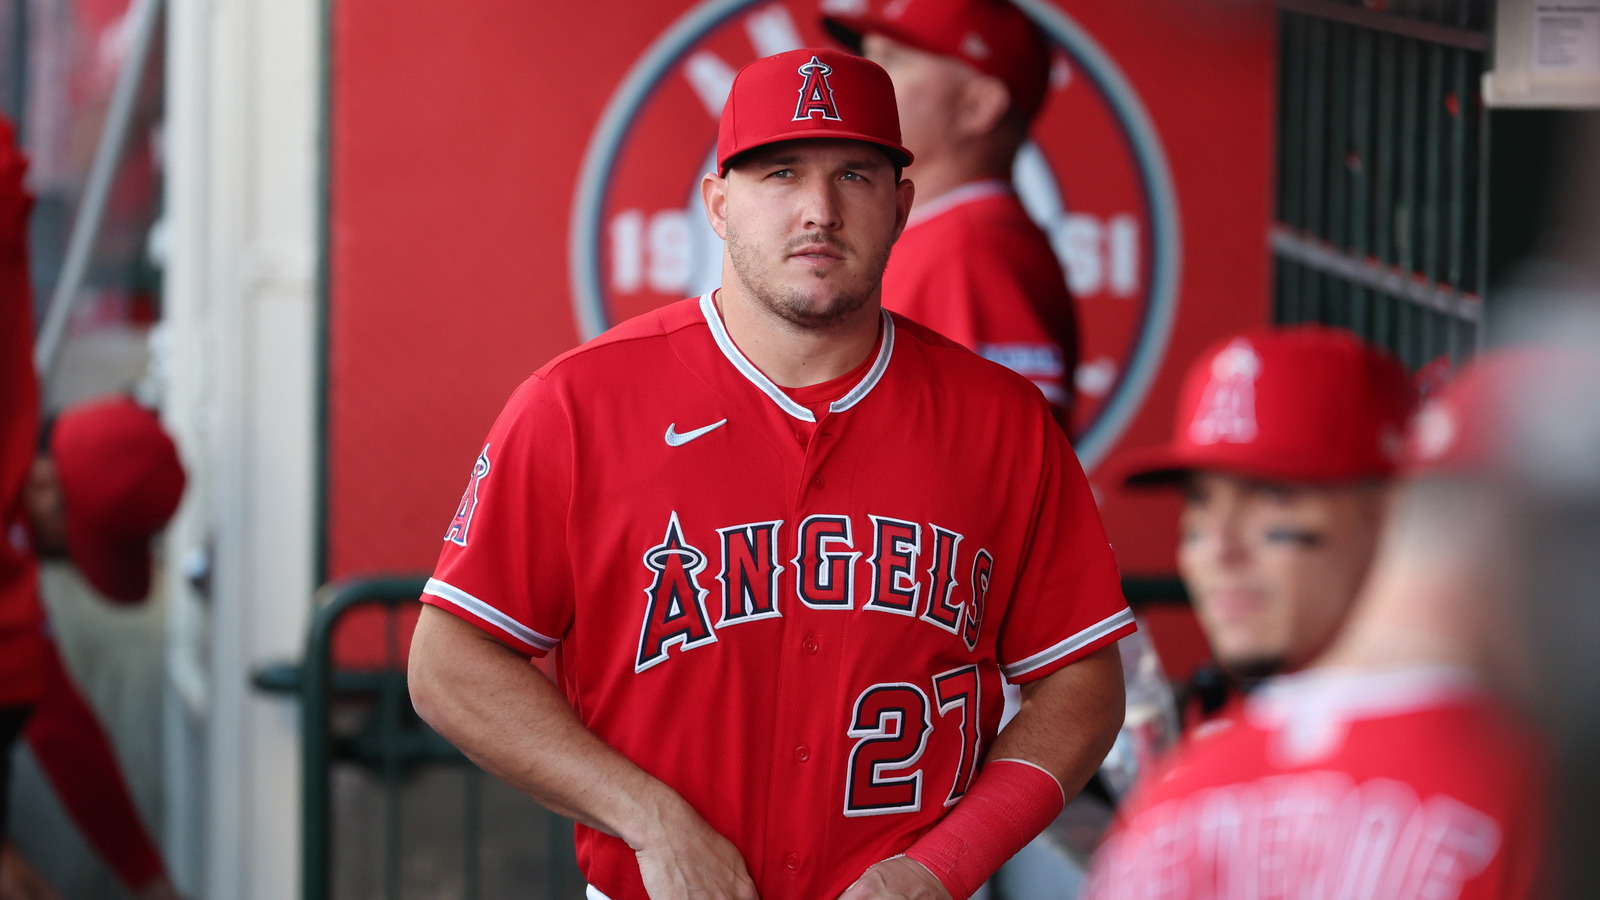 mike trout phillies jersey swap